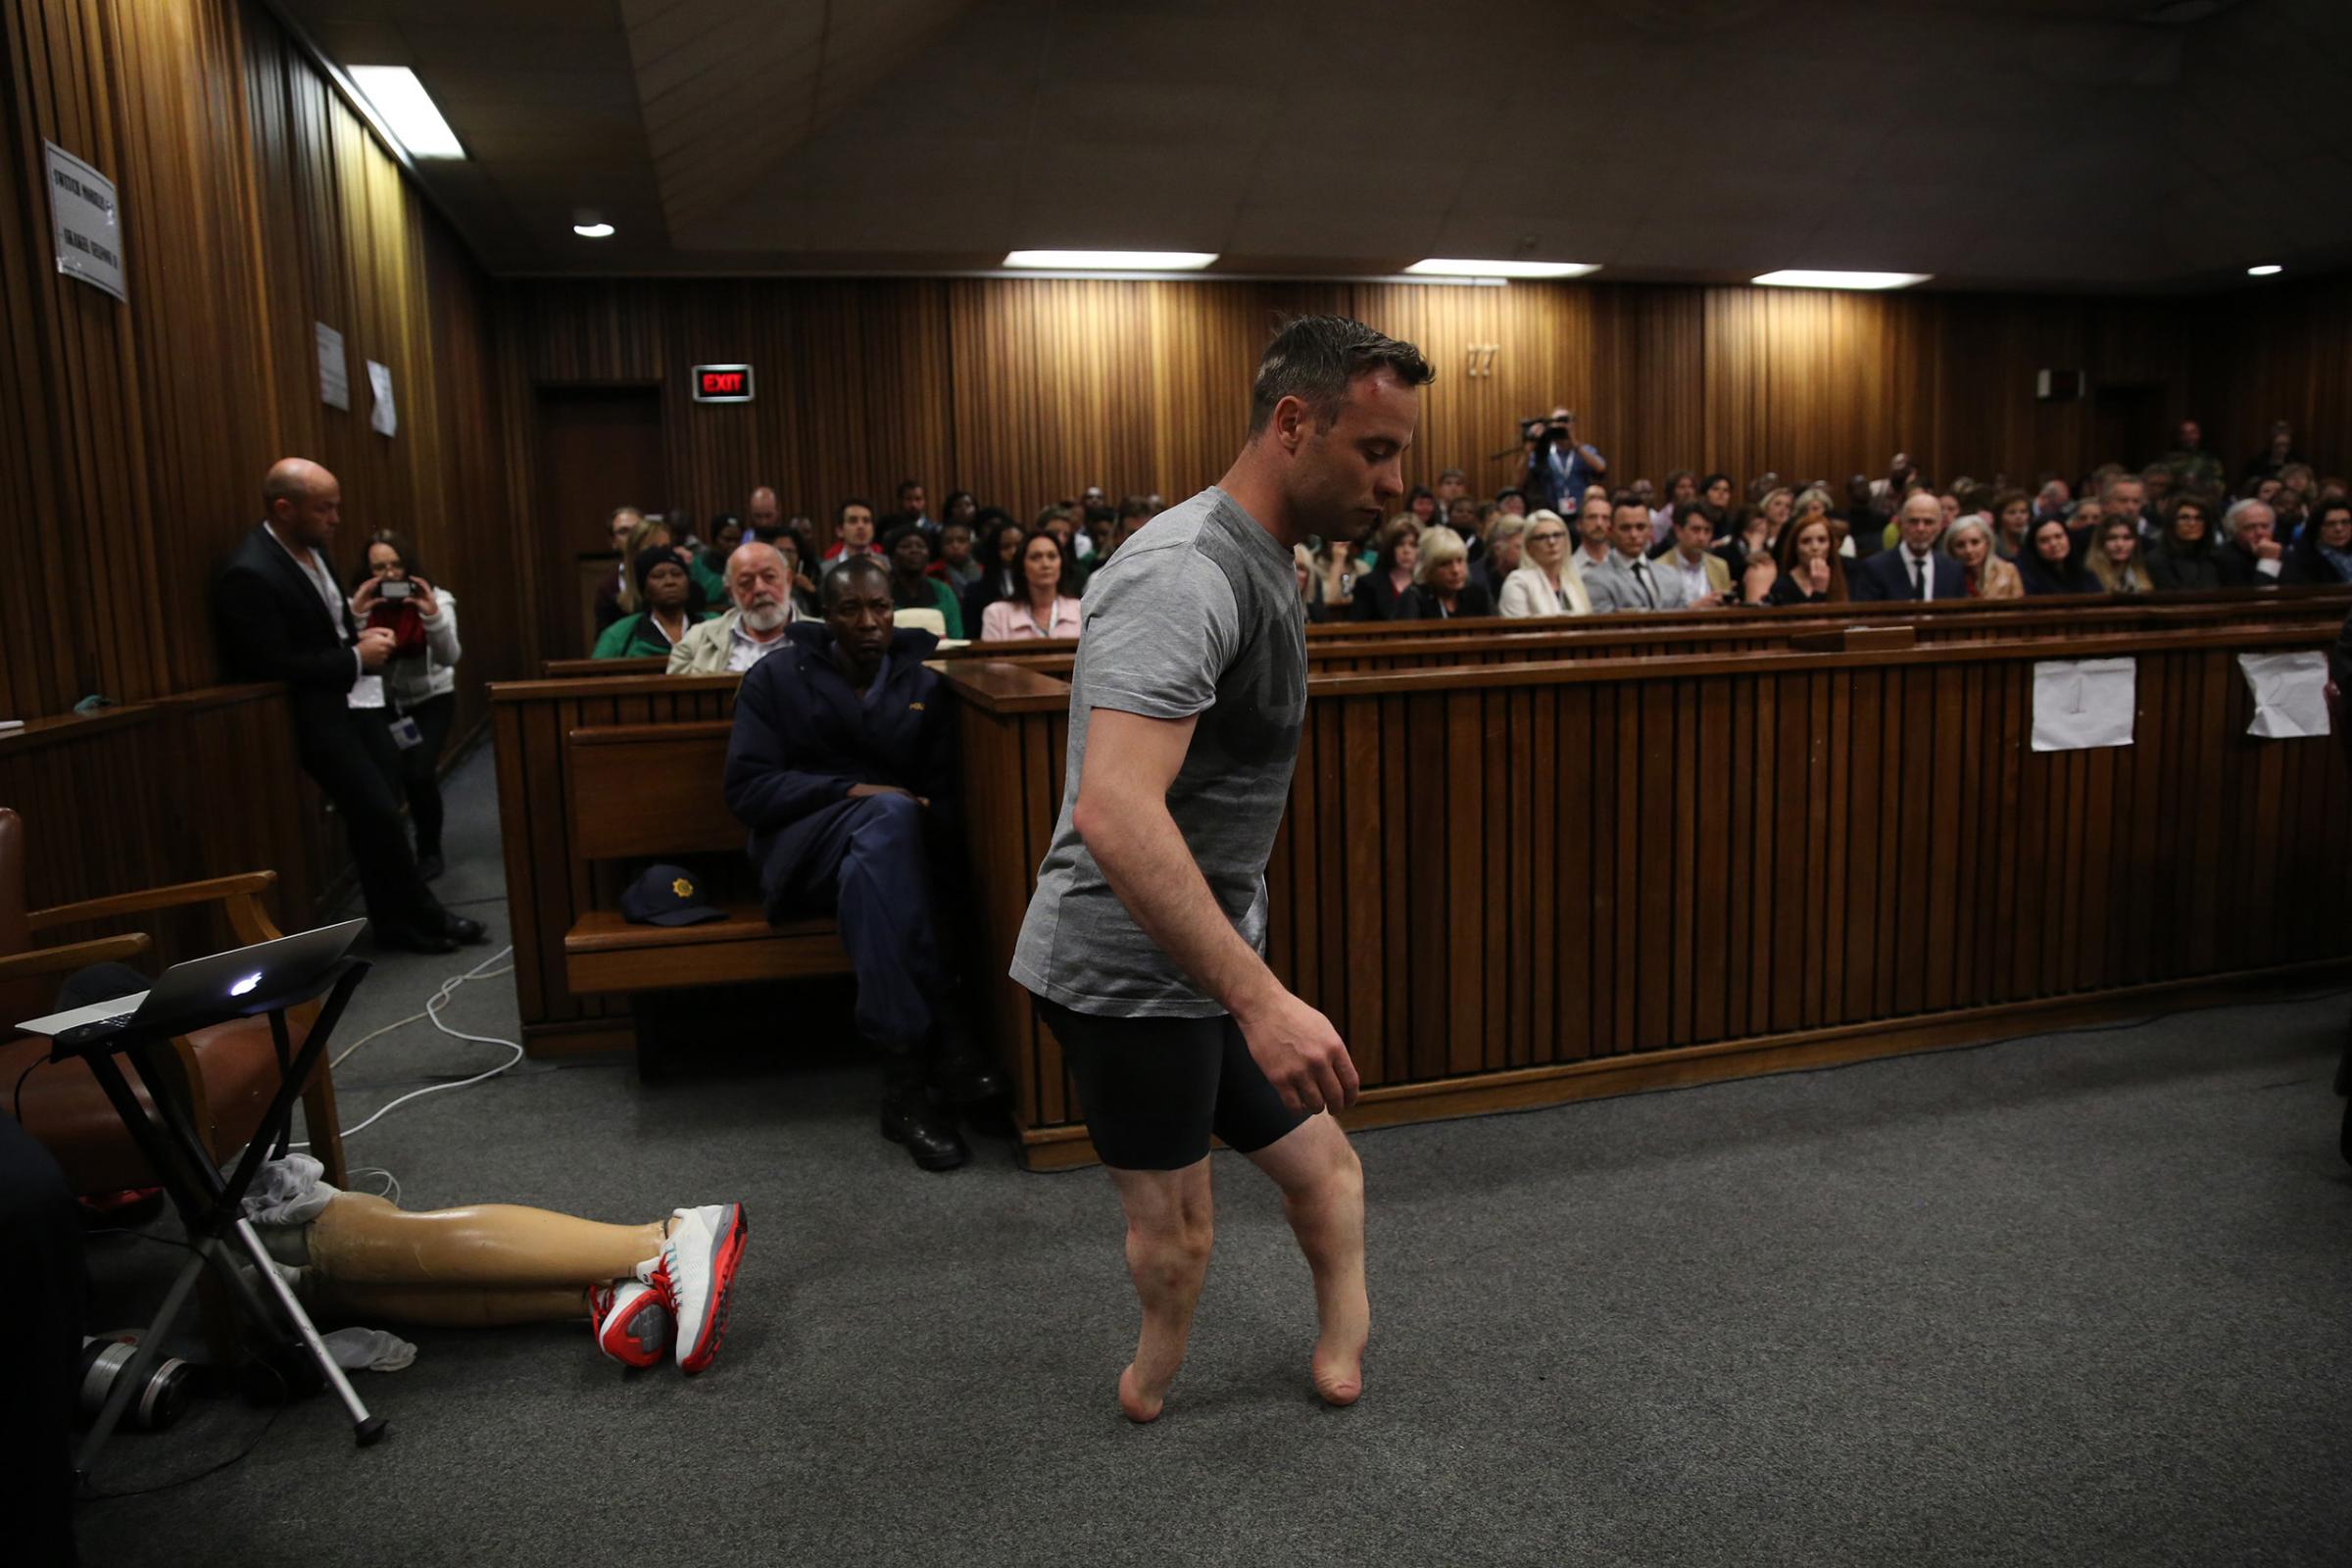 Paralympic gold medalist, Oscar Pistorius, prepares to walk across the courtroom without his prosthetic legs during the third day of his hearing at the Pretoria High Court for sentencing procedures in his murder trial in Pretoria on June 15, 2016.